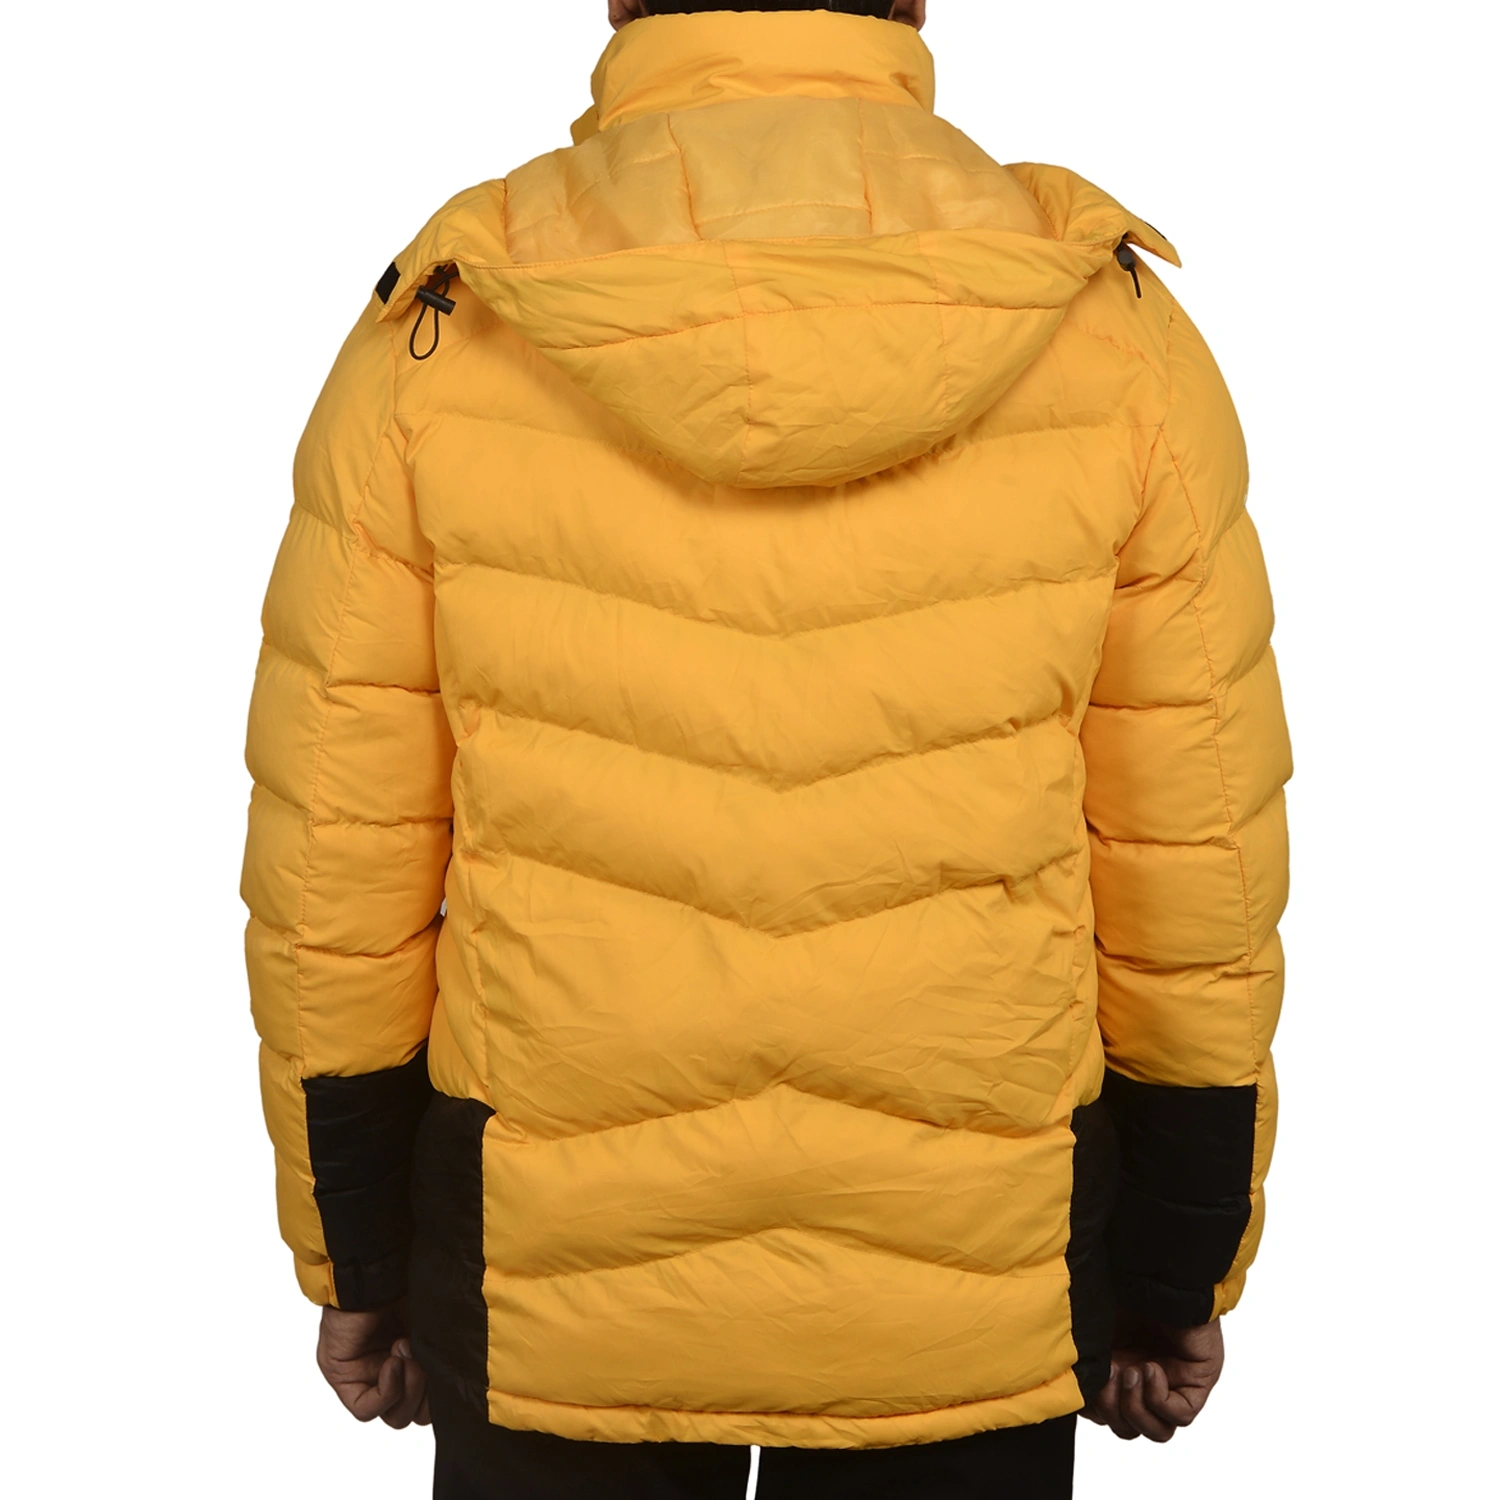 K2 Survivor Down Jacket for Men: Stylized Functionality for Extreme Cold Weather Expeditions (Up to -20°C)-4XL-Yellow-4